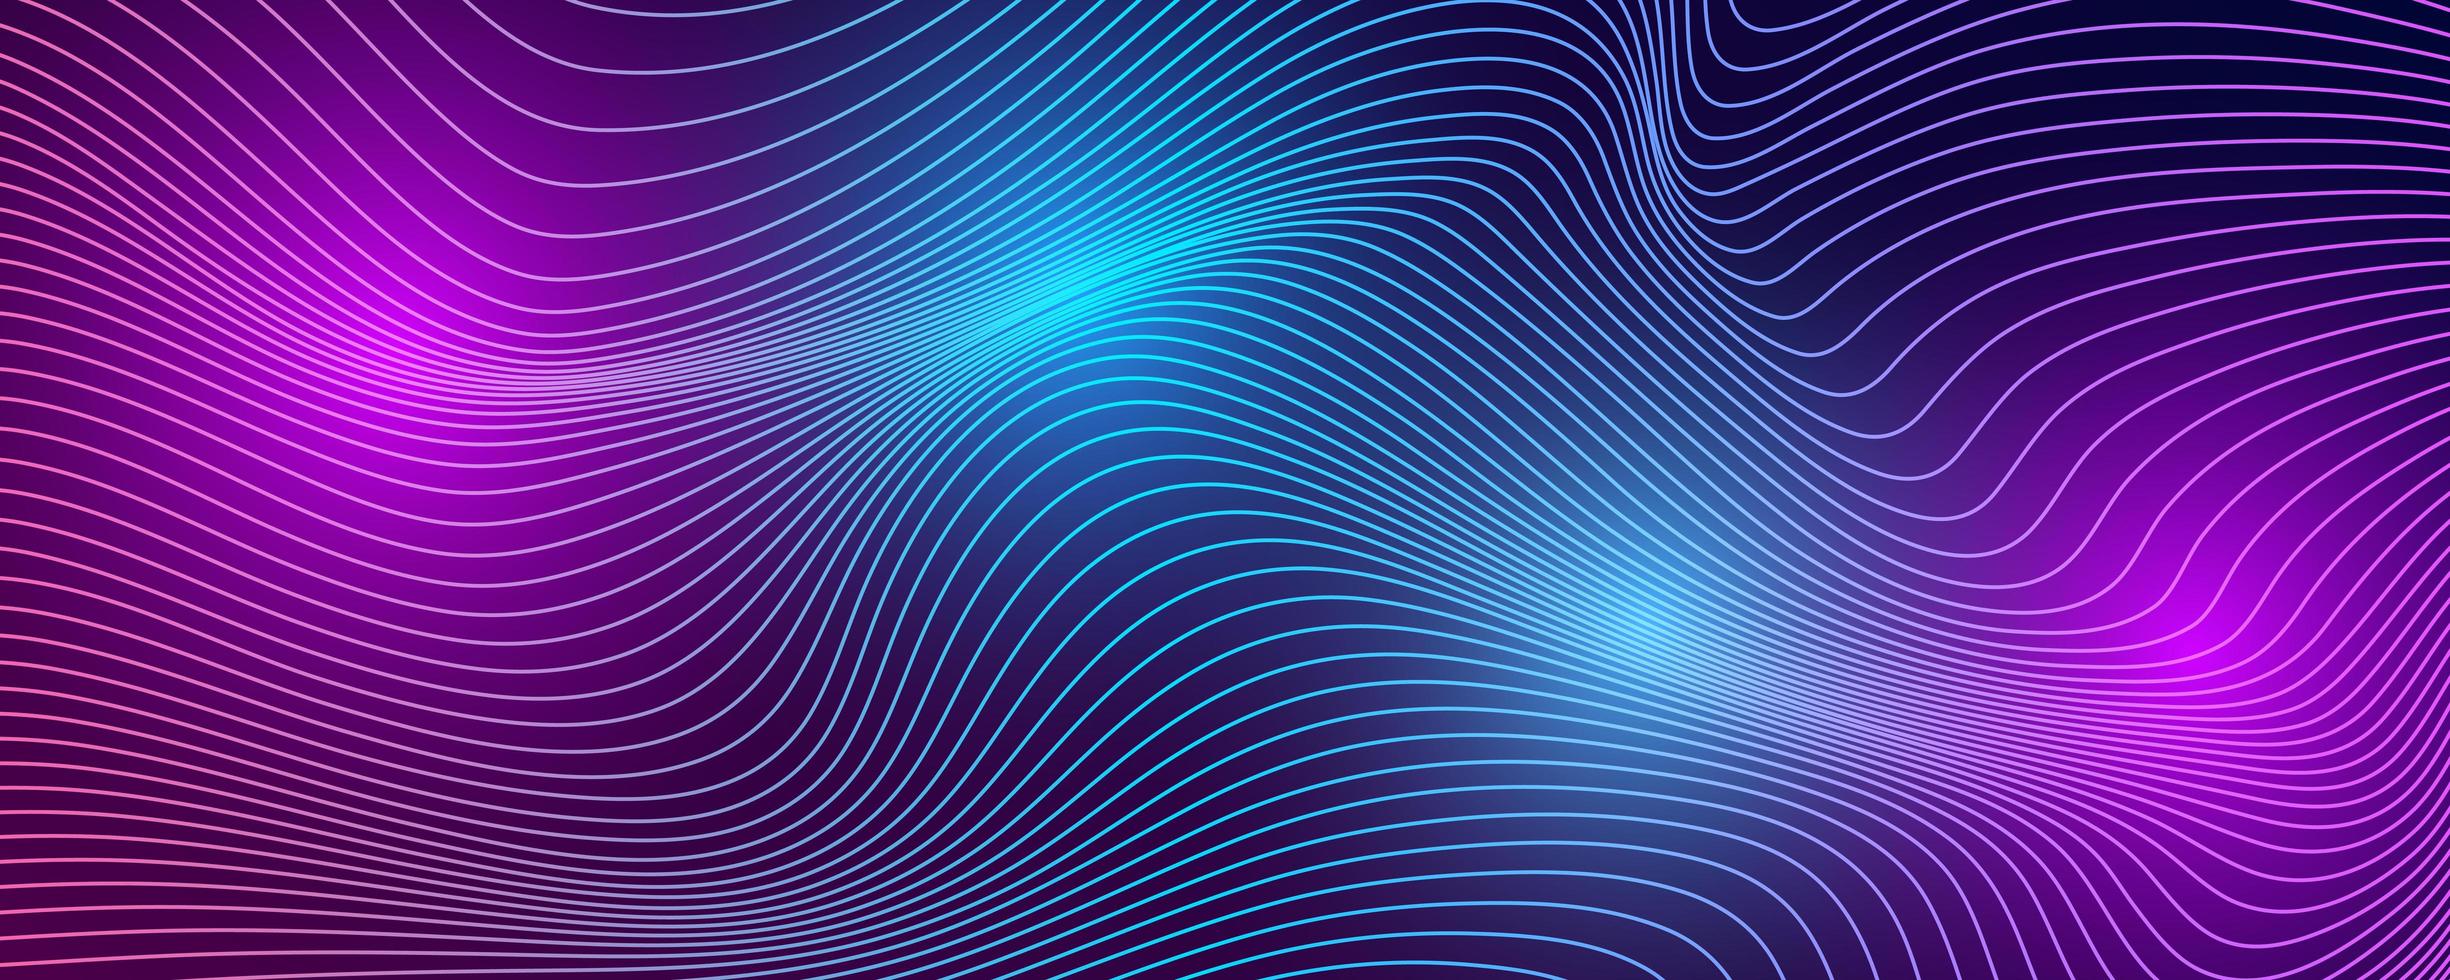 Tech background with abstract wave lines. vector